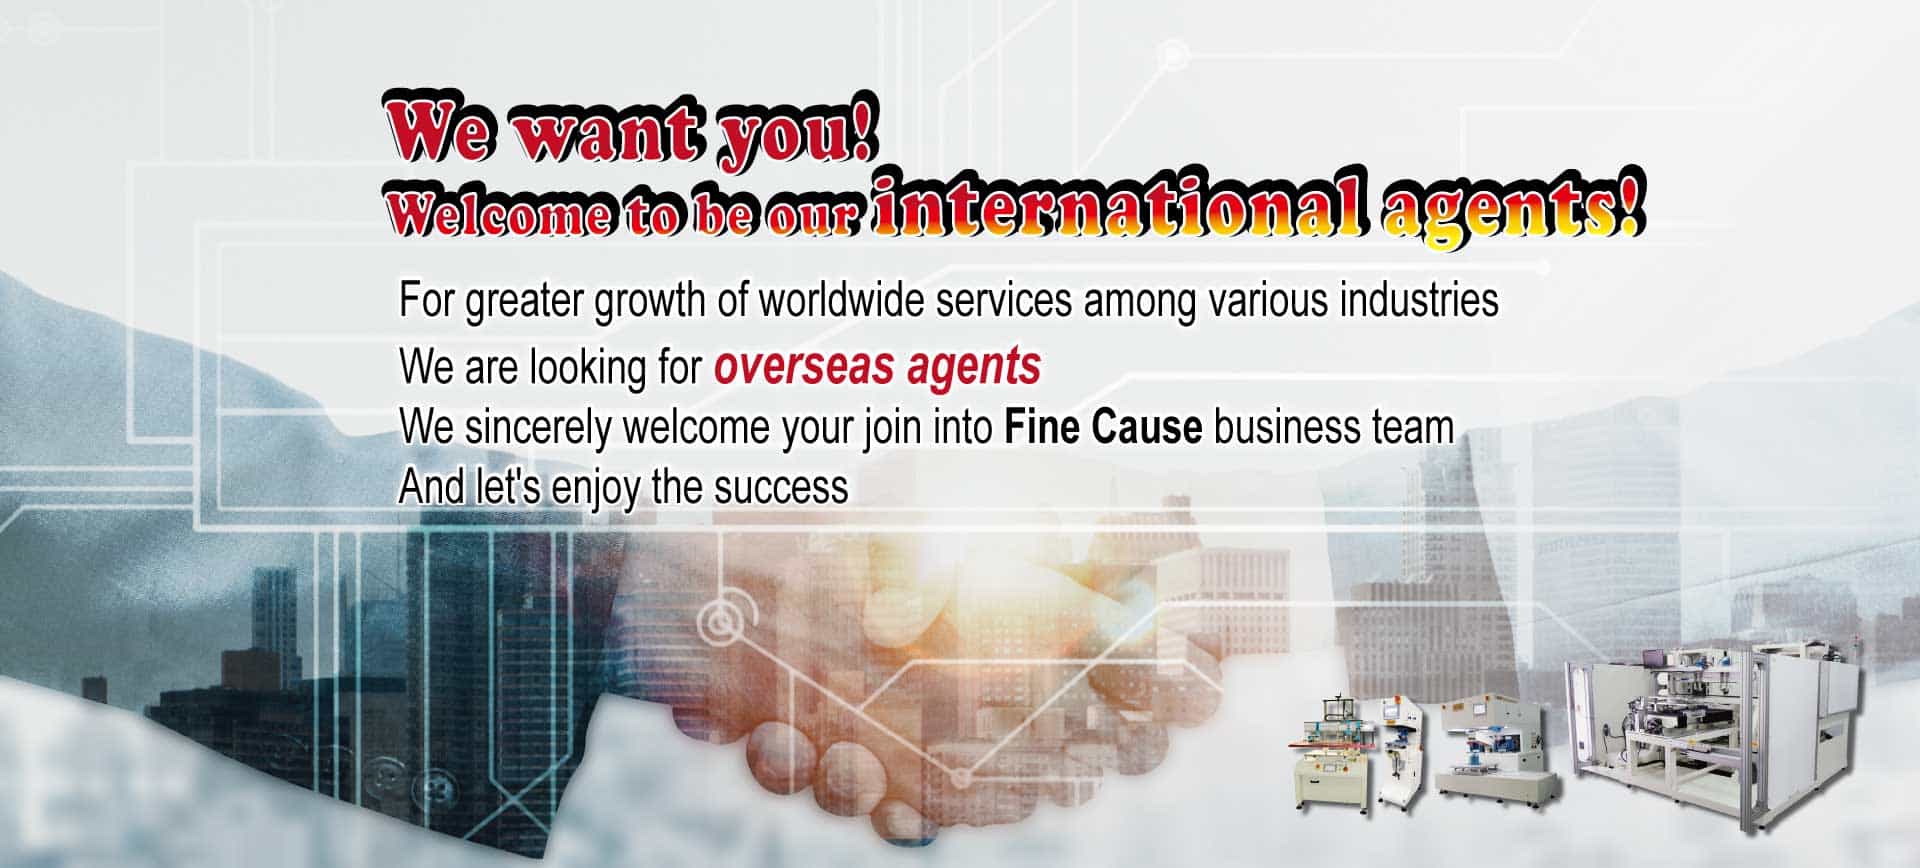 We want you! Welcome to be our international agents!